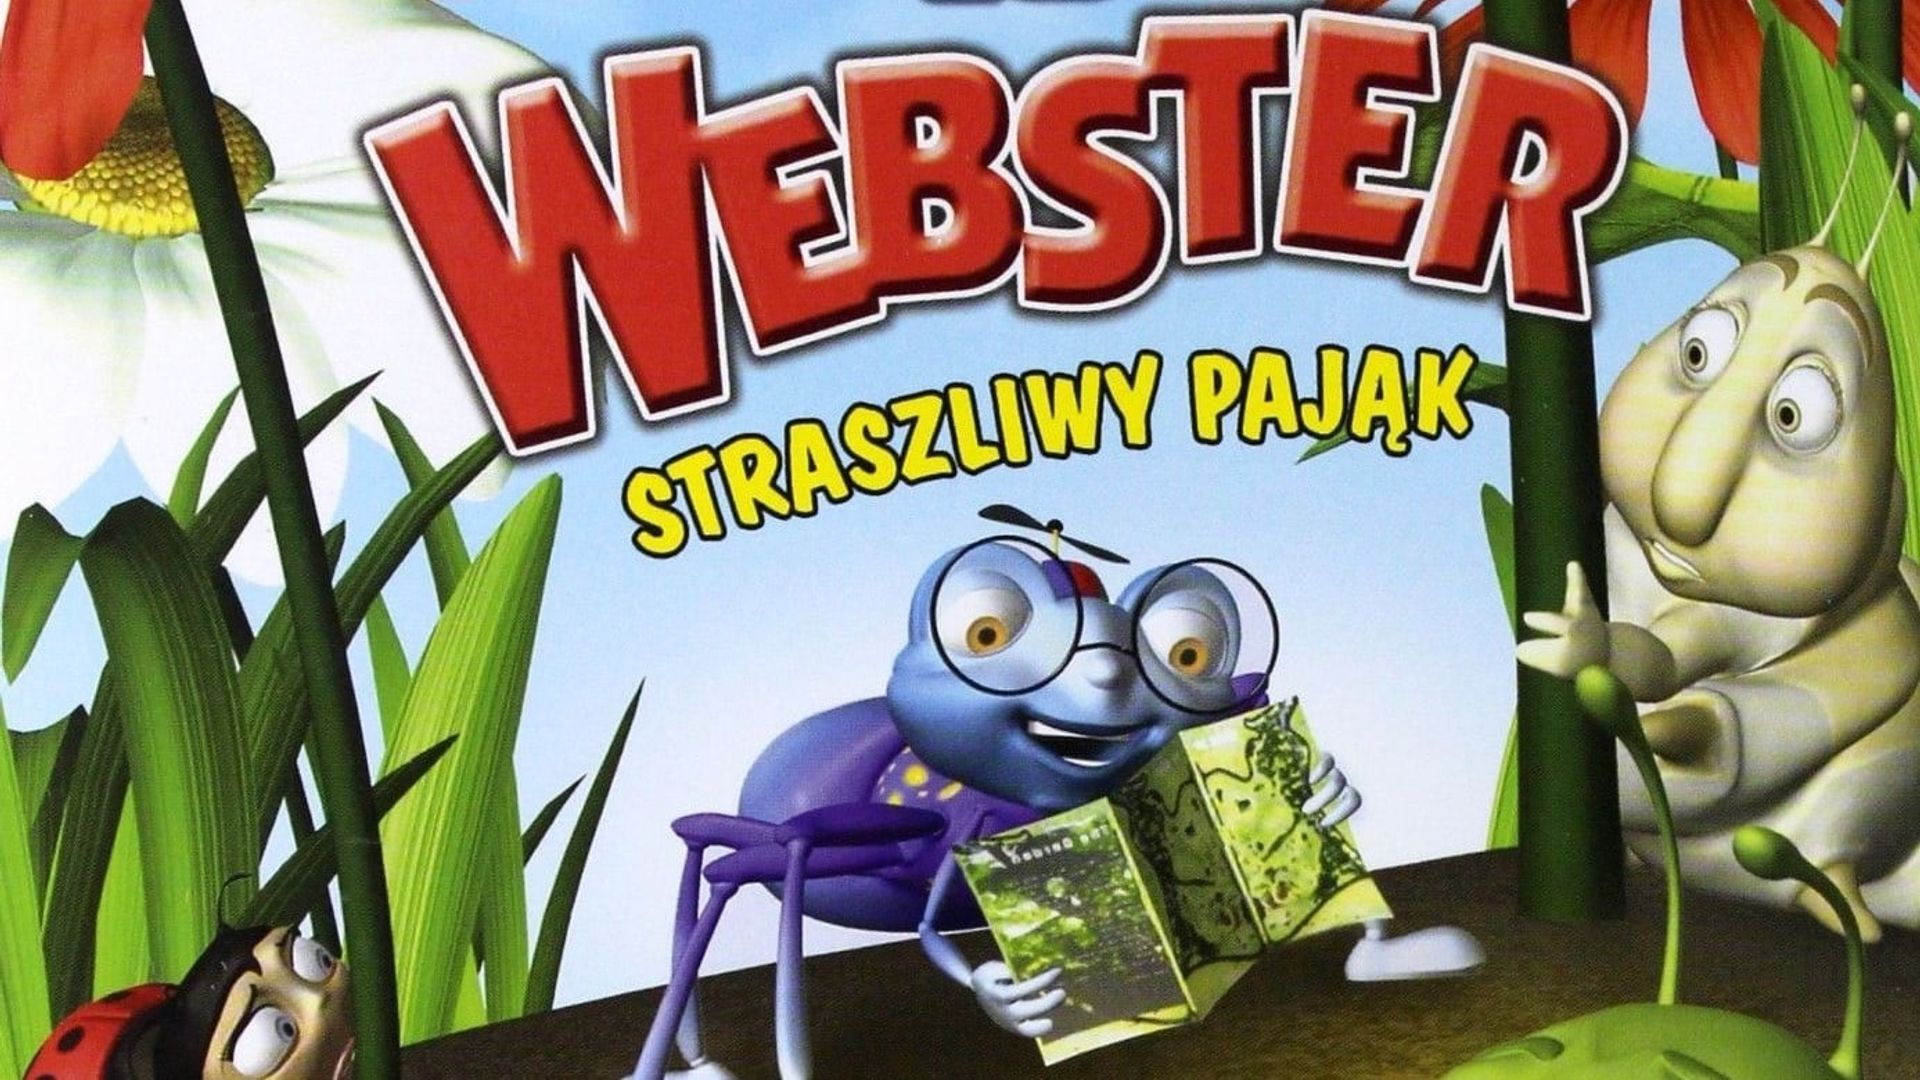 Hermie & Friends: Webster the Scaredy Spider background